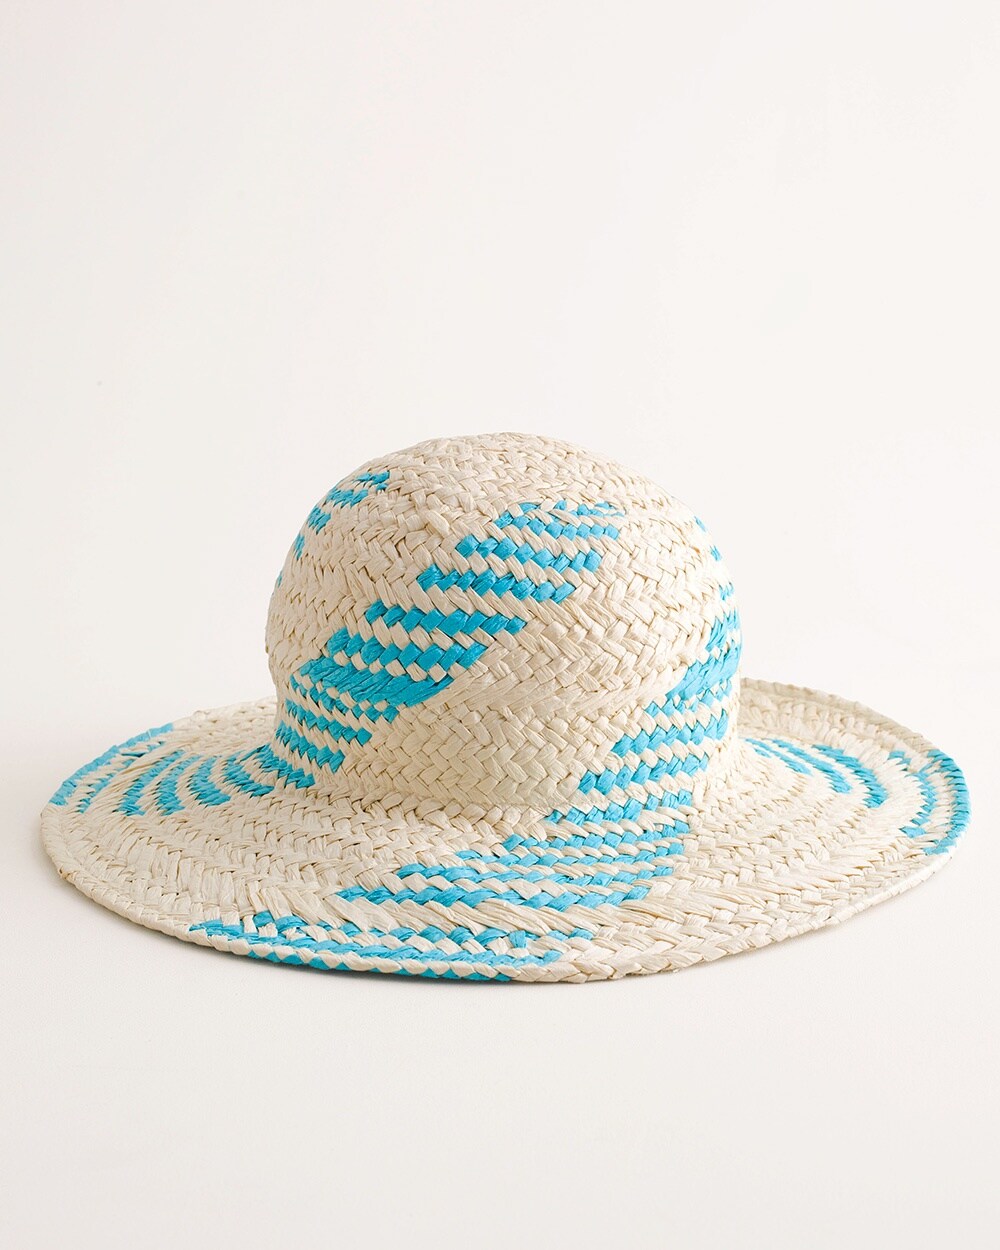 Patterned Straw Hat